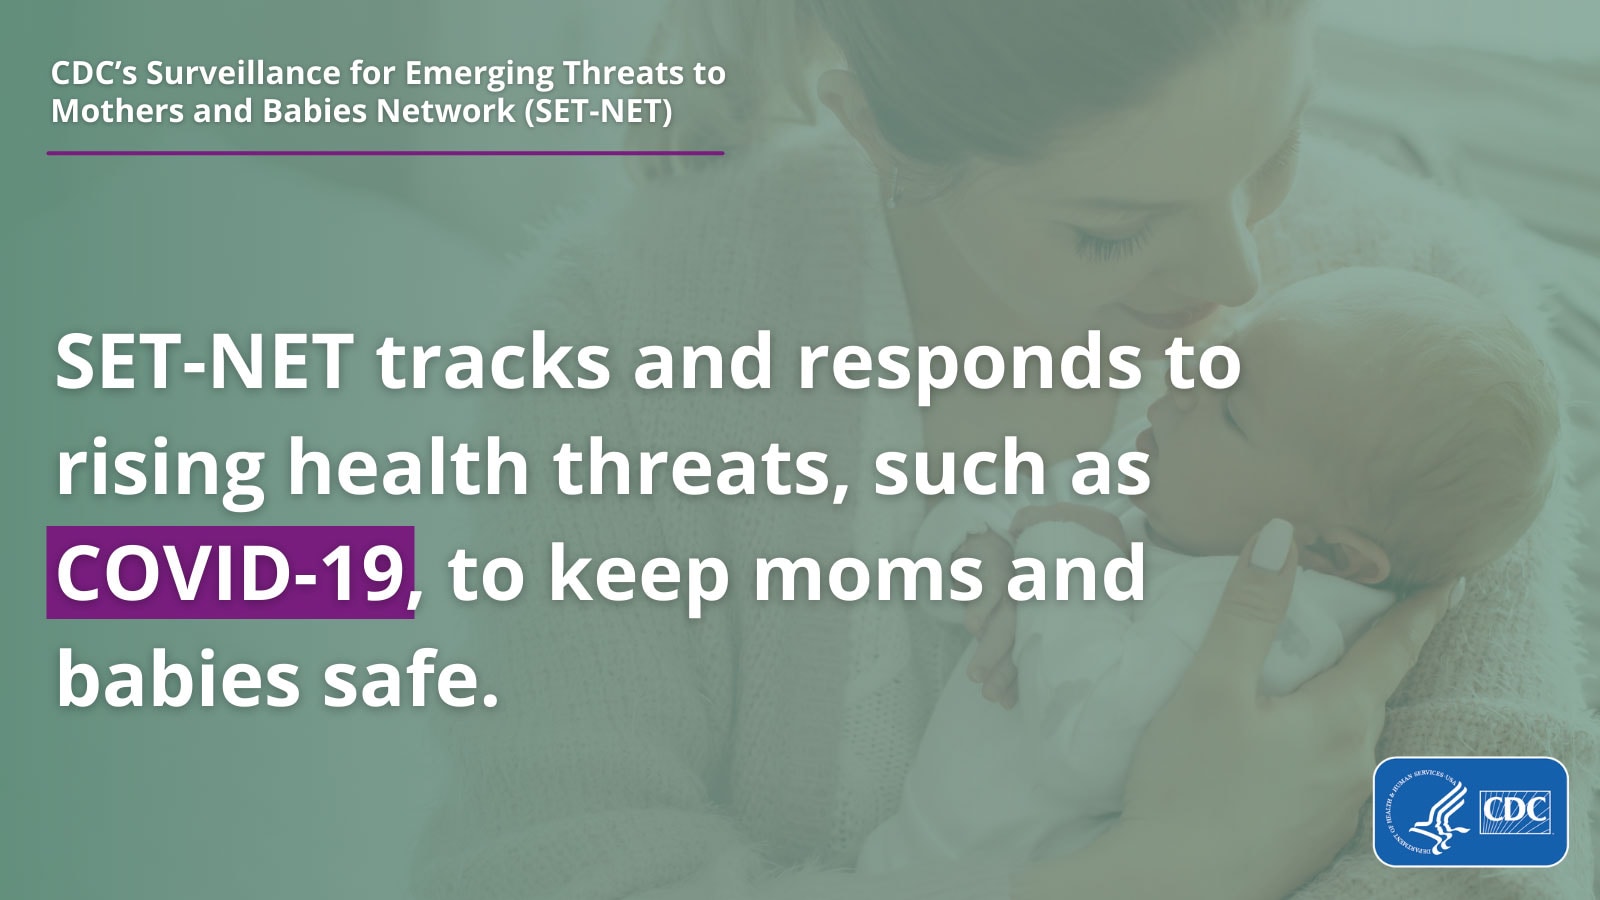 SET-NET tracks and responds to rising health threats, such as COVID-19, to keep moms and babies safe.